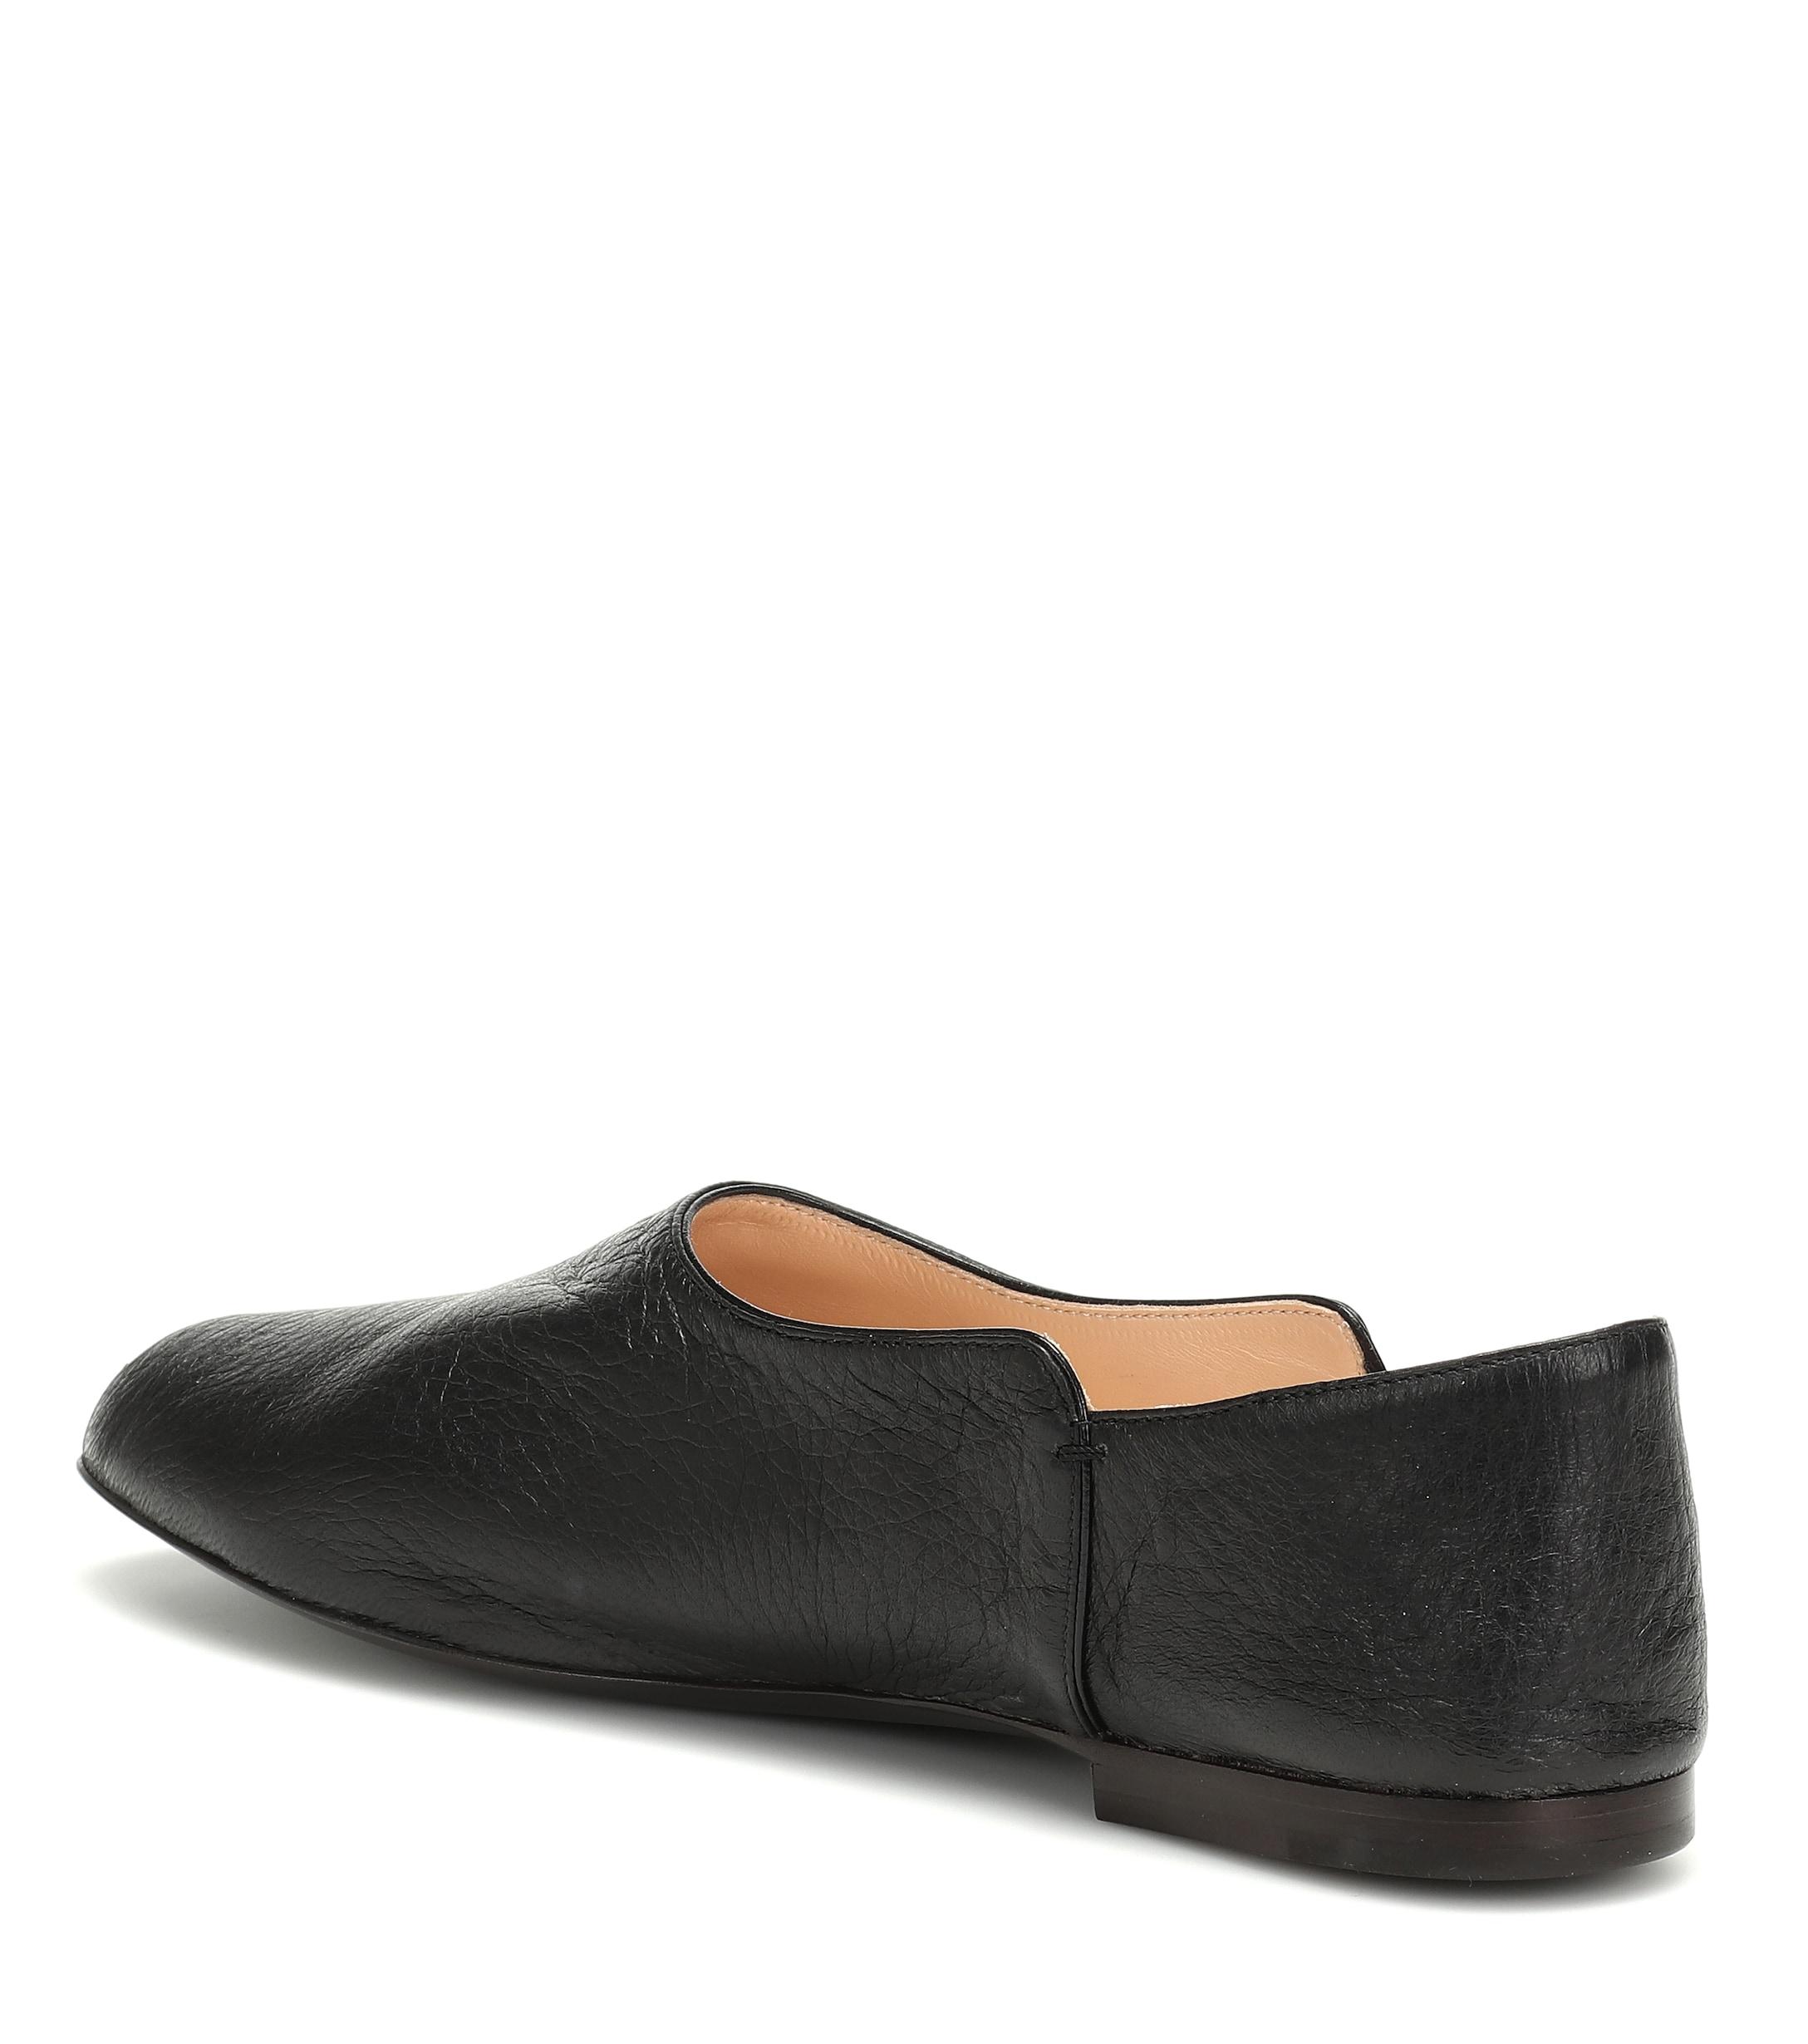 The Row Boheme Leather Loafers in Black - Lyst